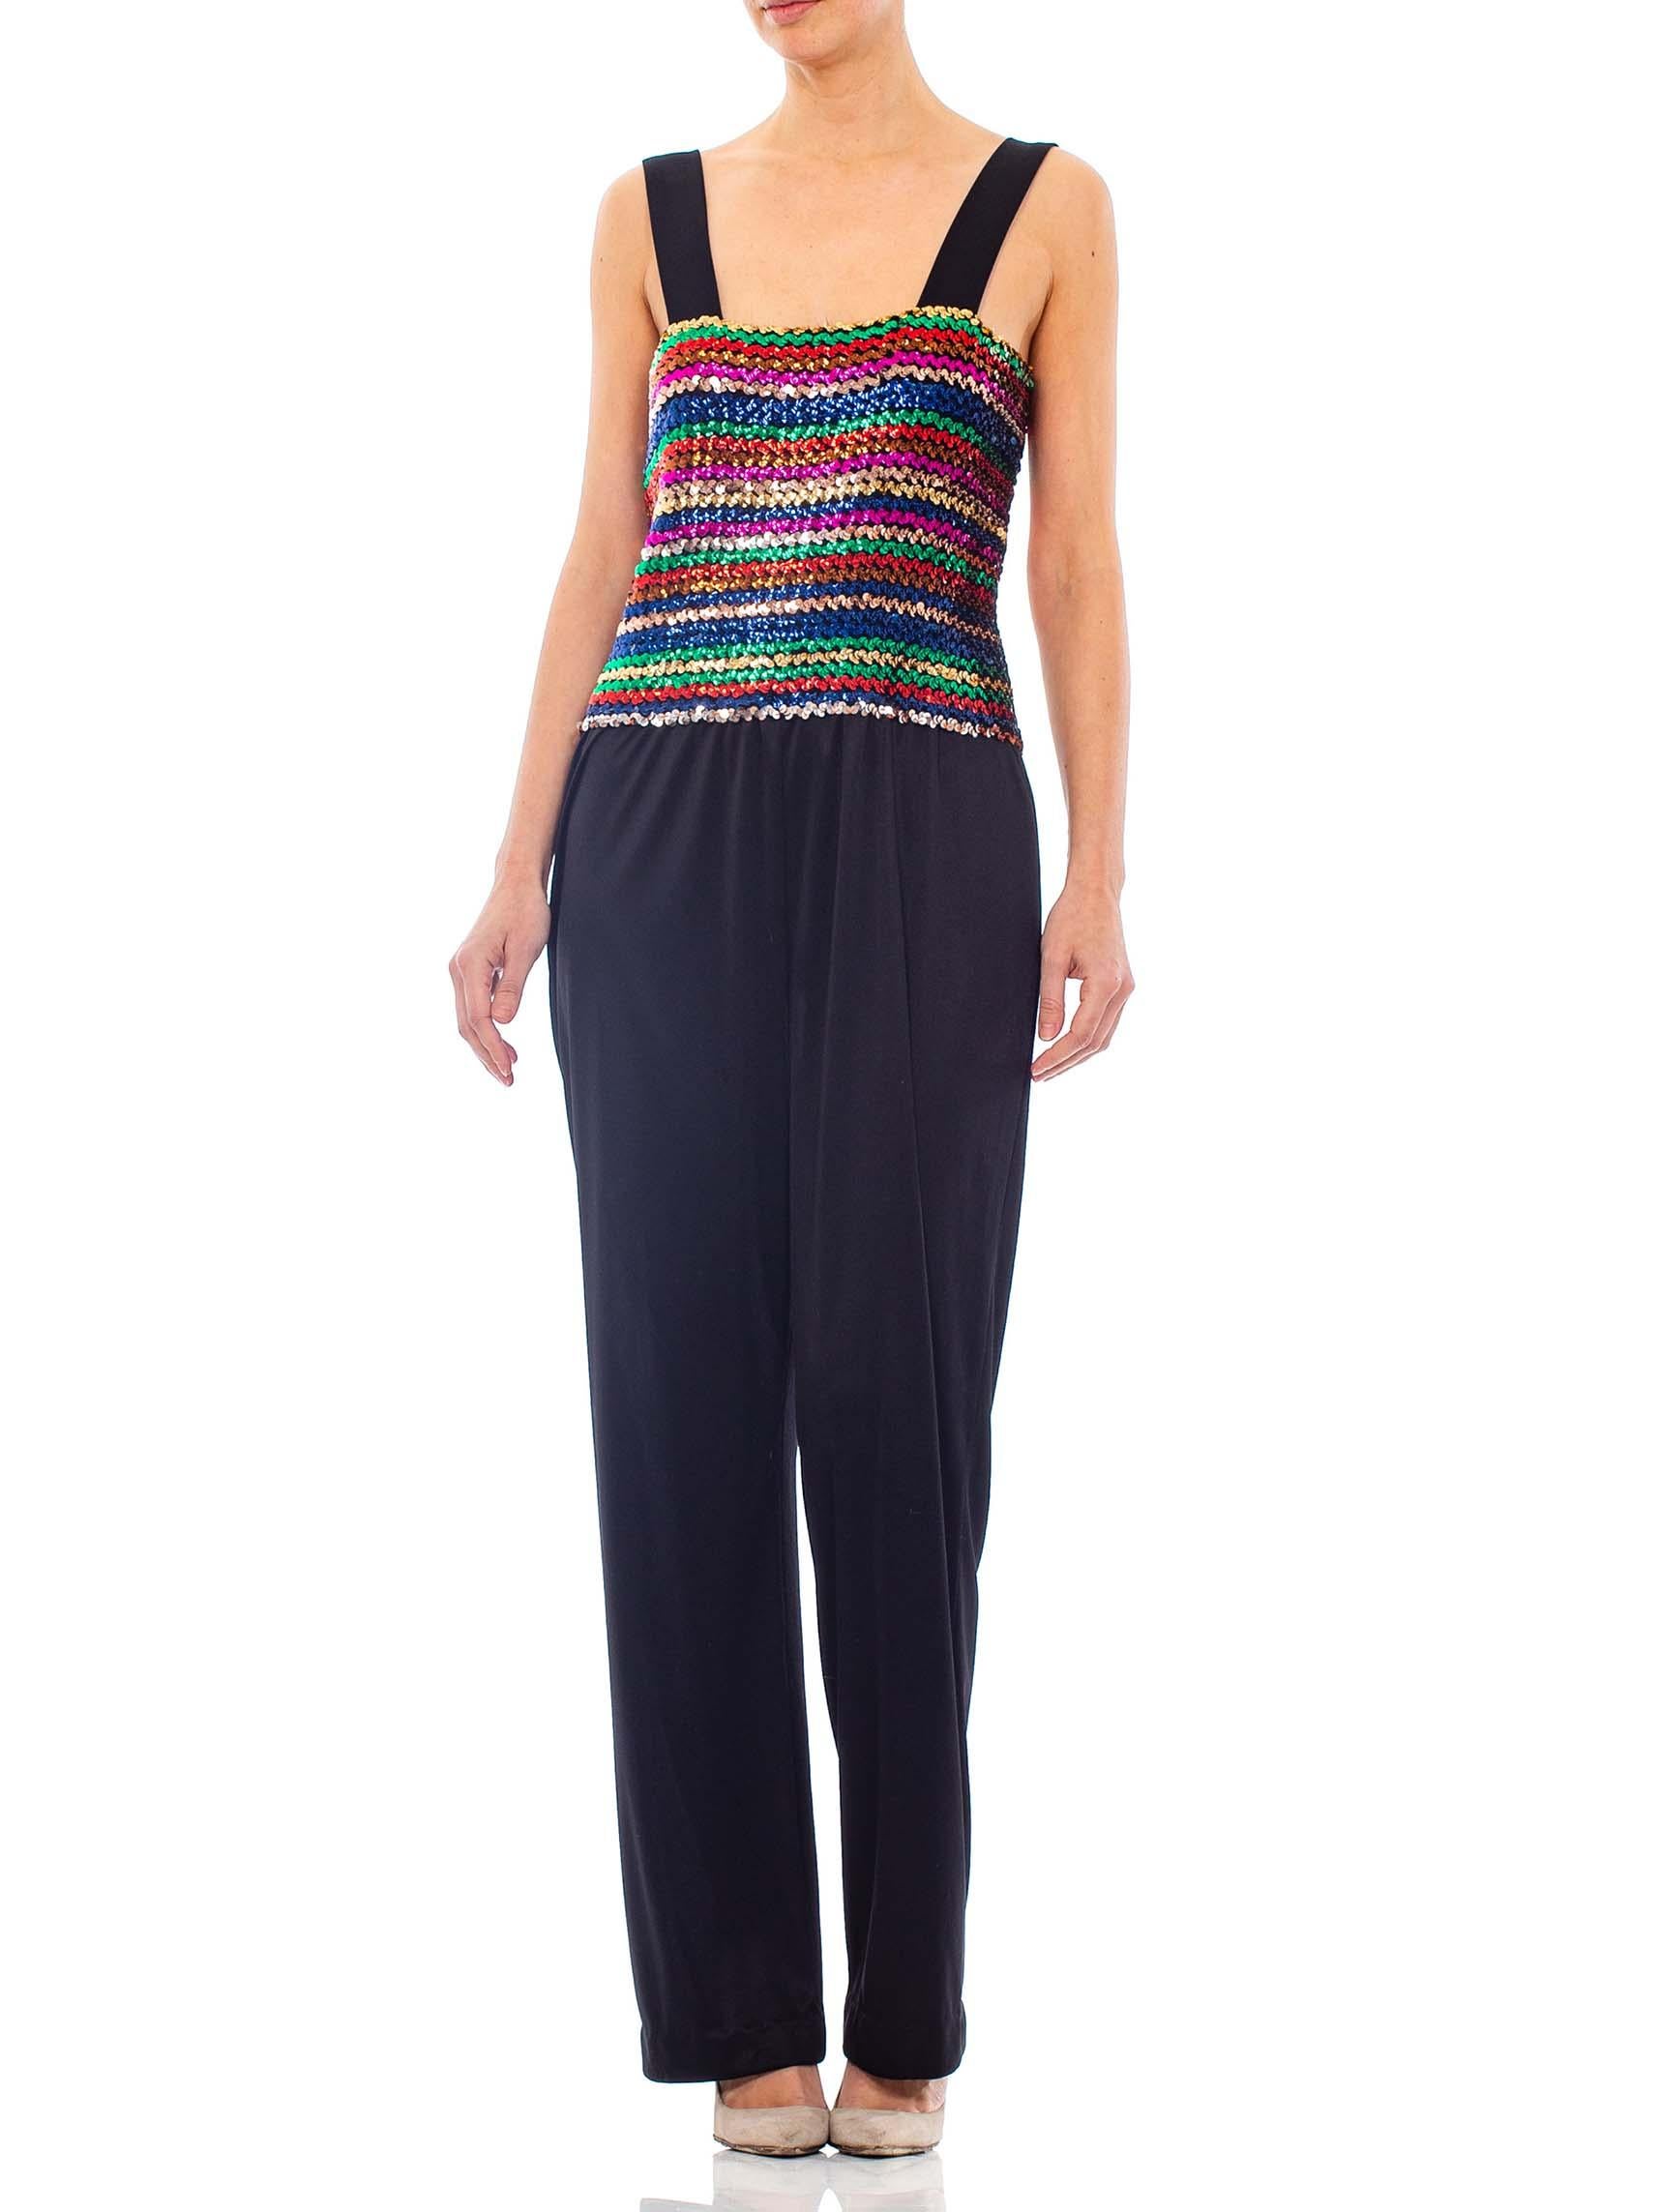 Women's 1970S Black Sequined Polyester Jersey Disco Party Jumpsuit With Vest For Sale